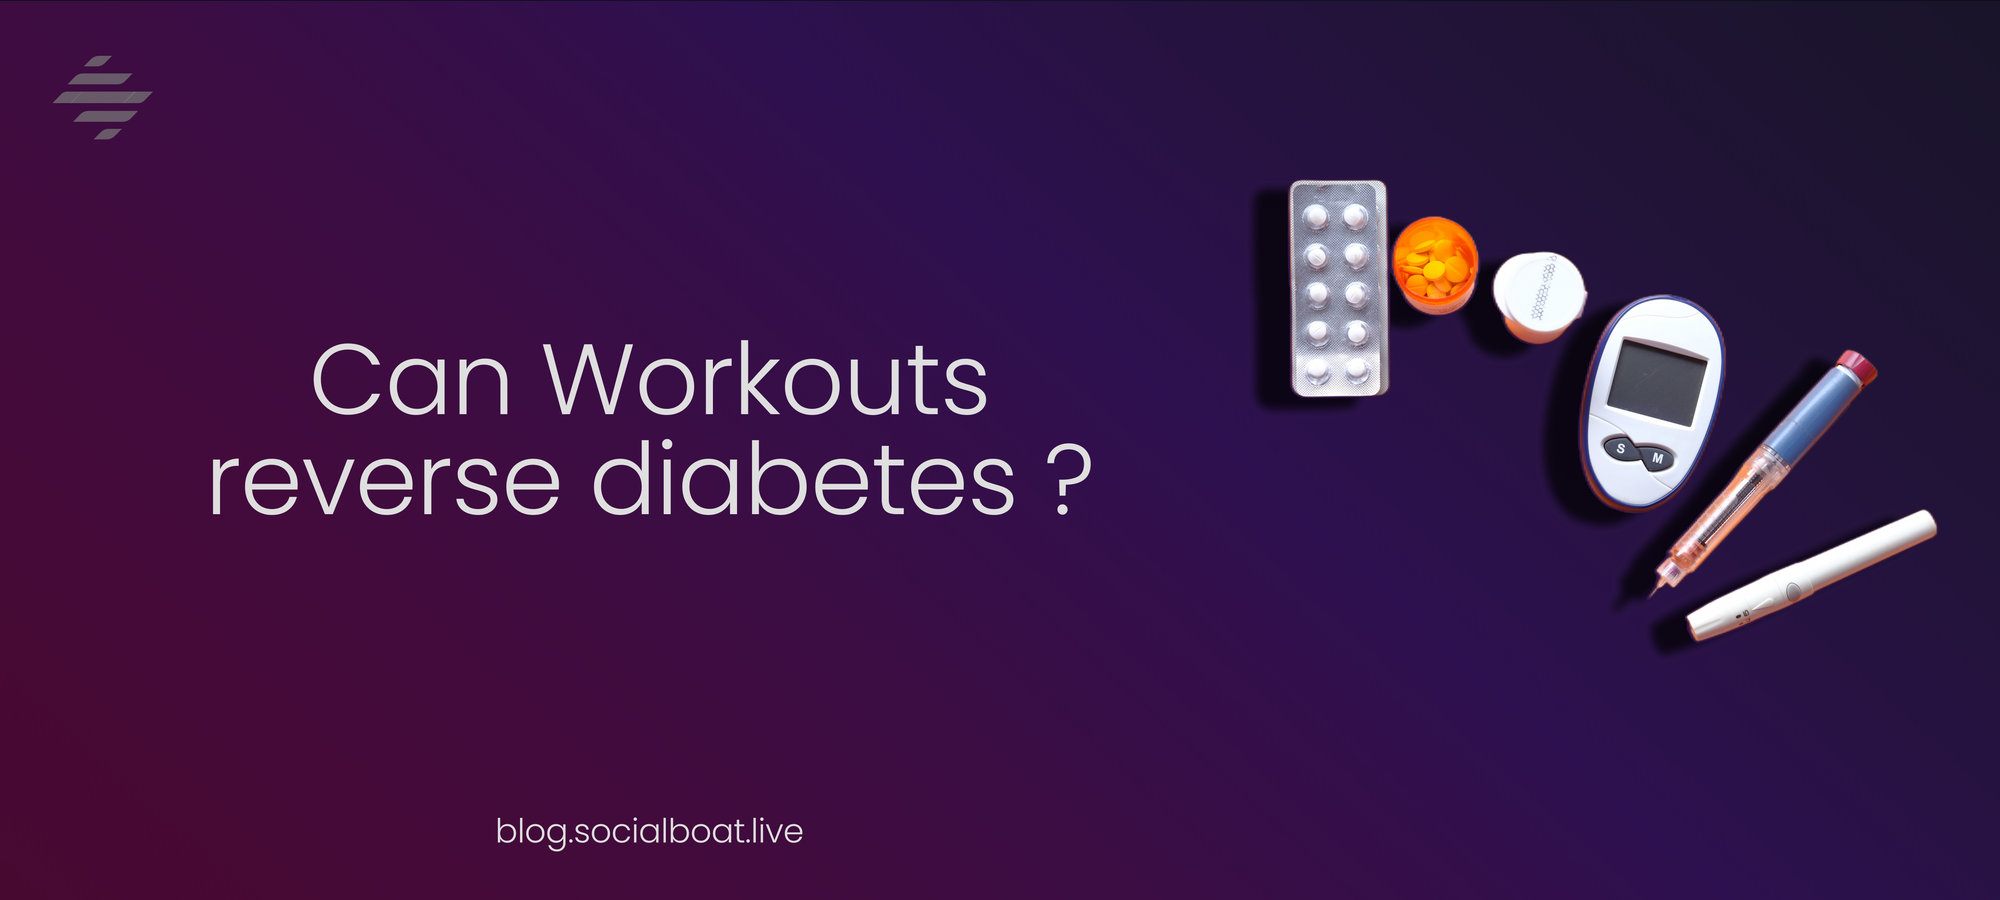 Diabetes is one of the most common ailments worldwide. 